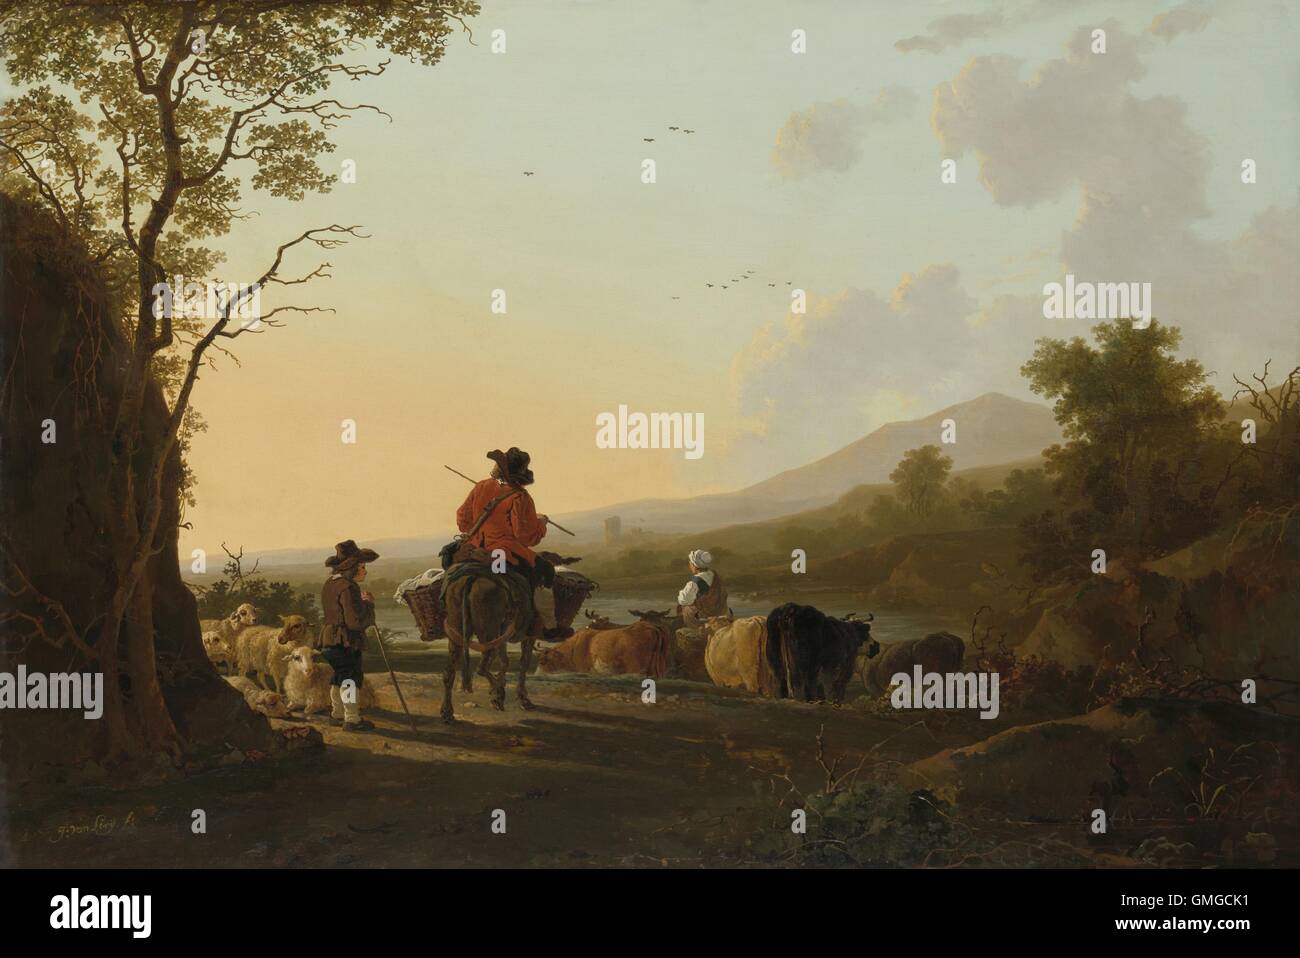 Landscape with Cattle Driver and Shepherd, by Jacob van Strij, 1780-85, Dutch painting, oil on panel. Italian landscape with a drover on a mule with his wife and a herd of cows. On left is a shepherd boy with a bunch of sheep (BSLOC 2016 3 299) Stock Photo